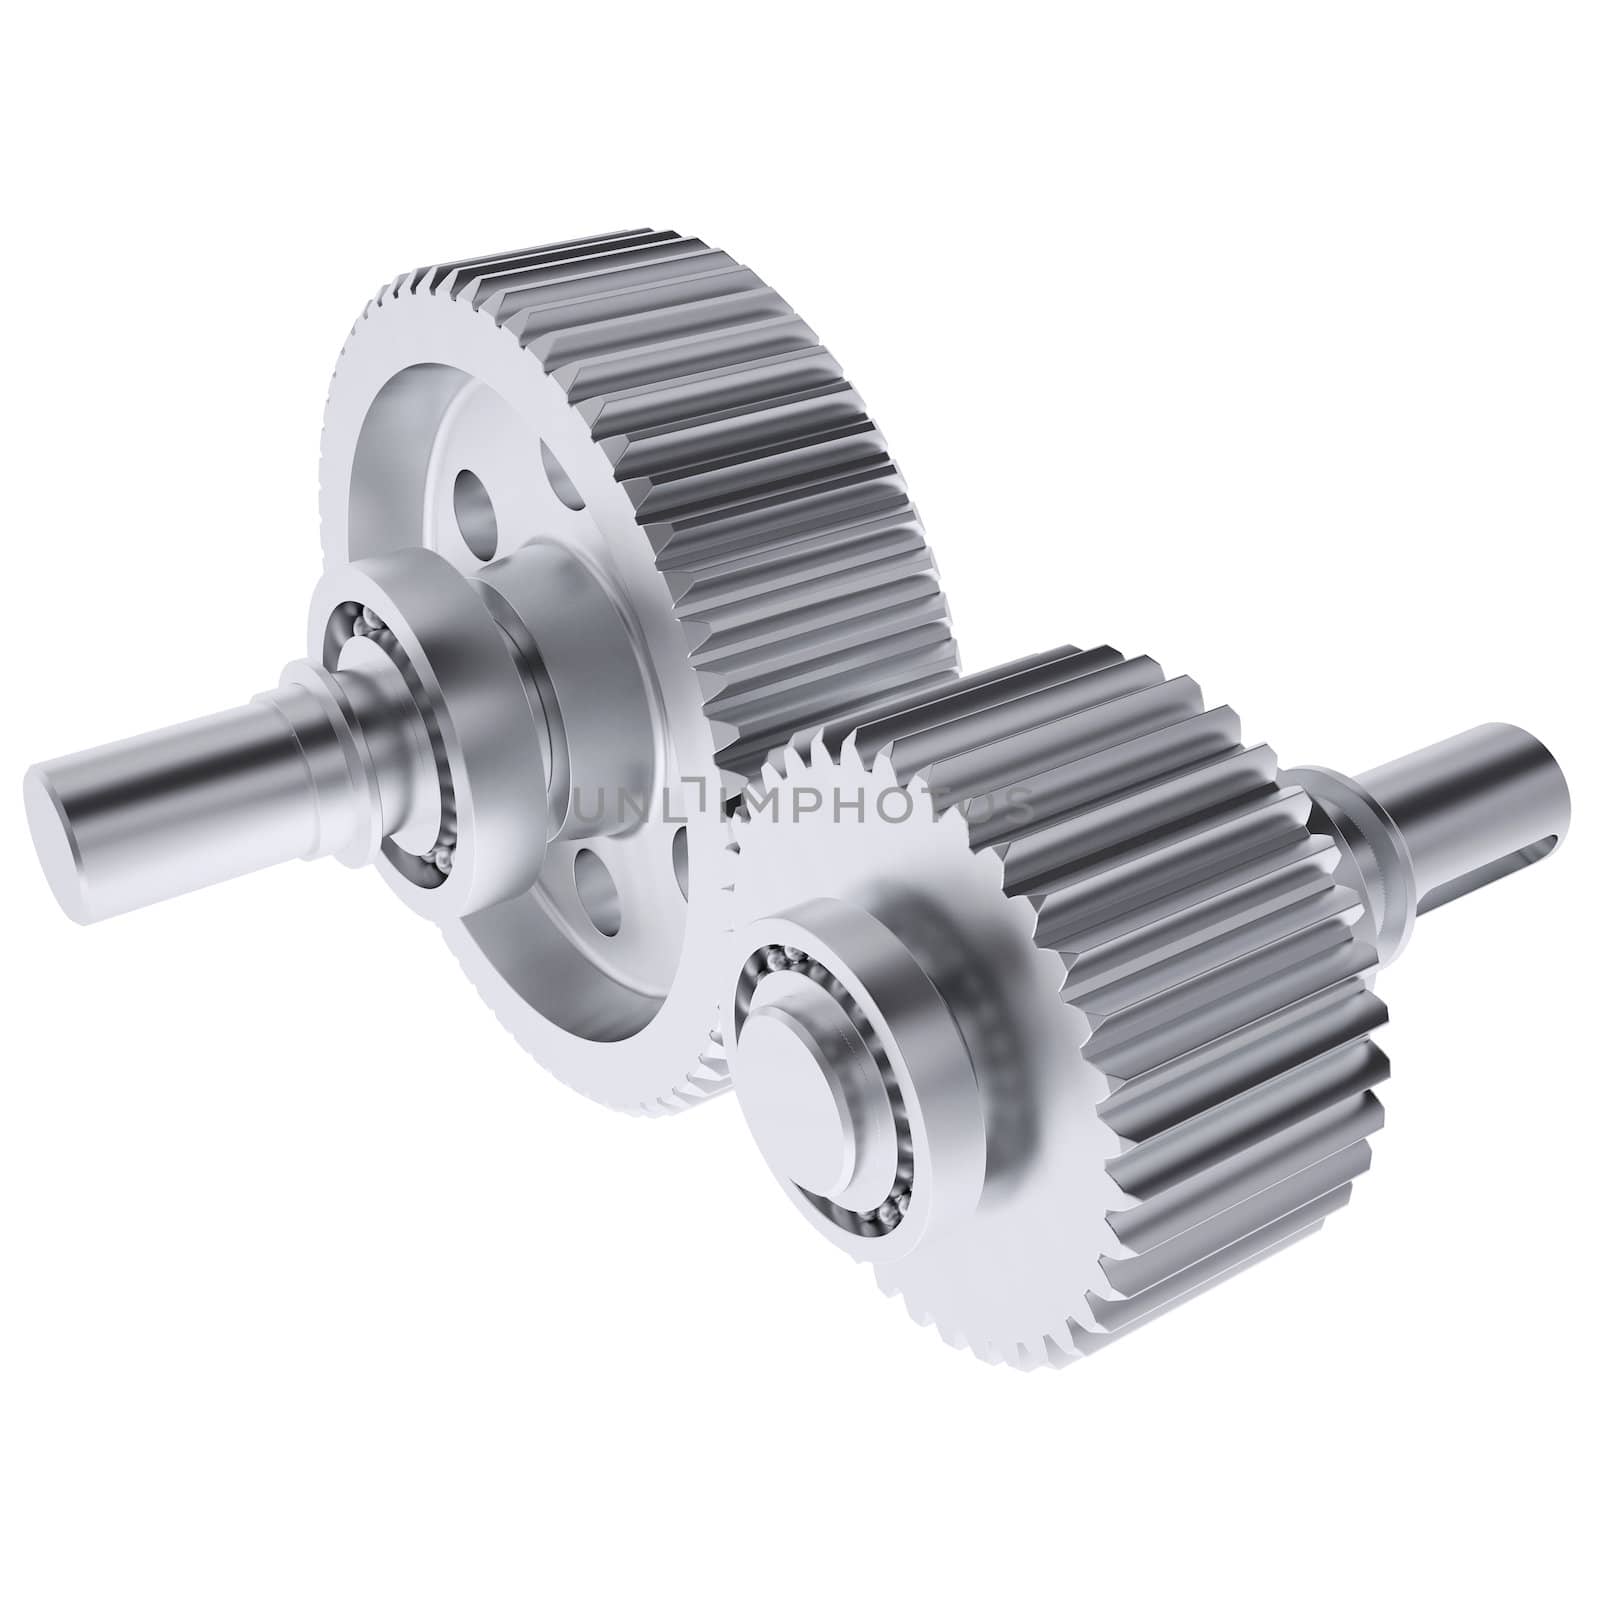 Metal shafts, gears and bearings by cherezoff